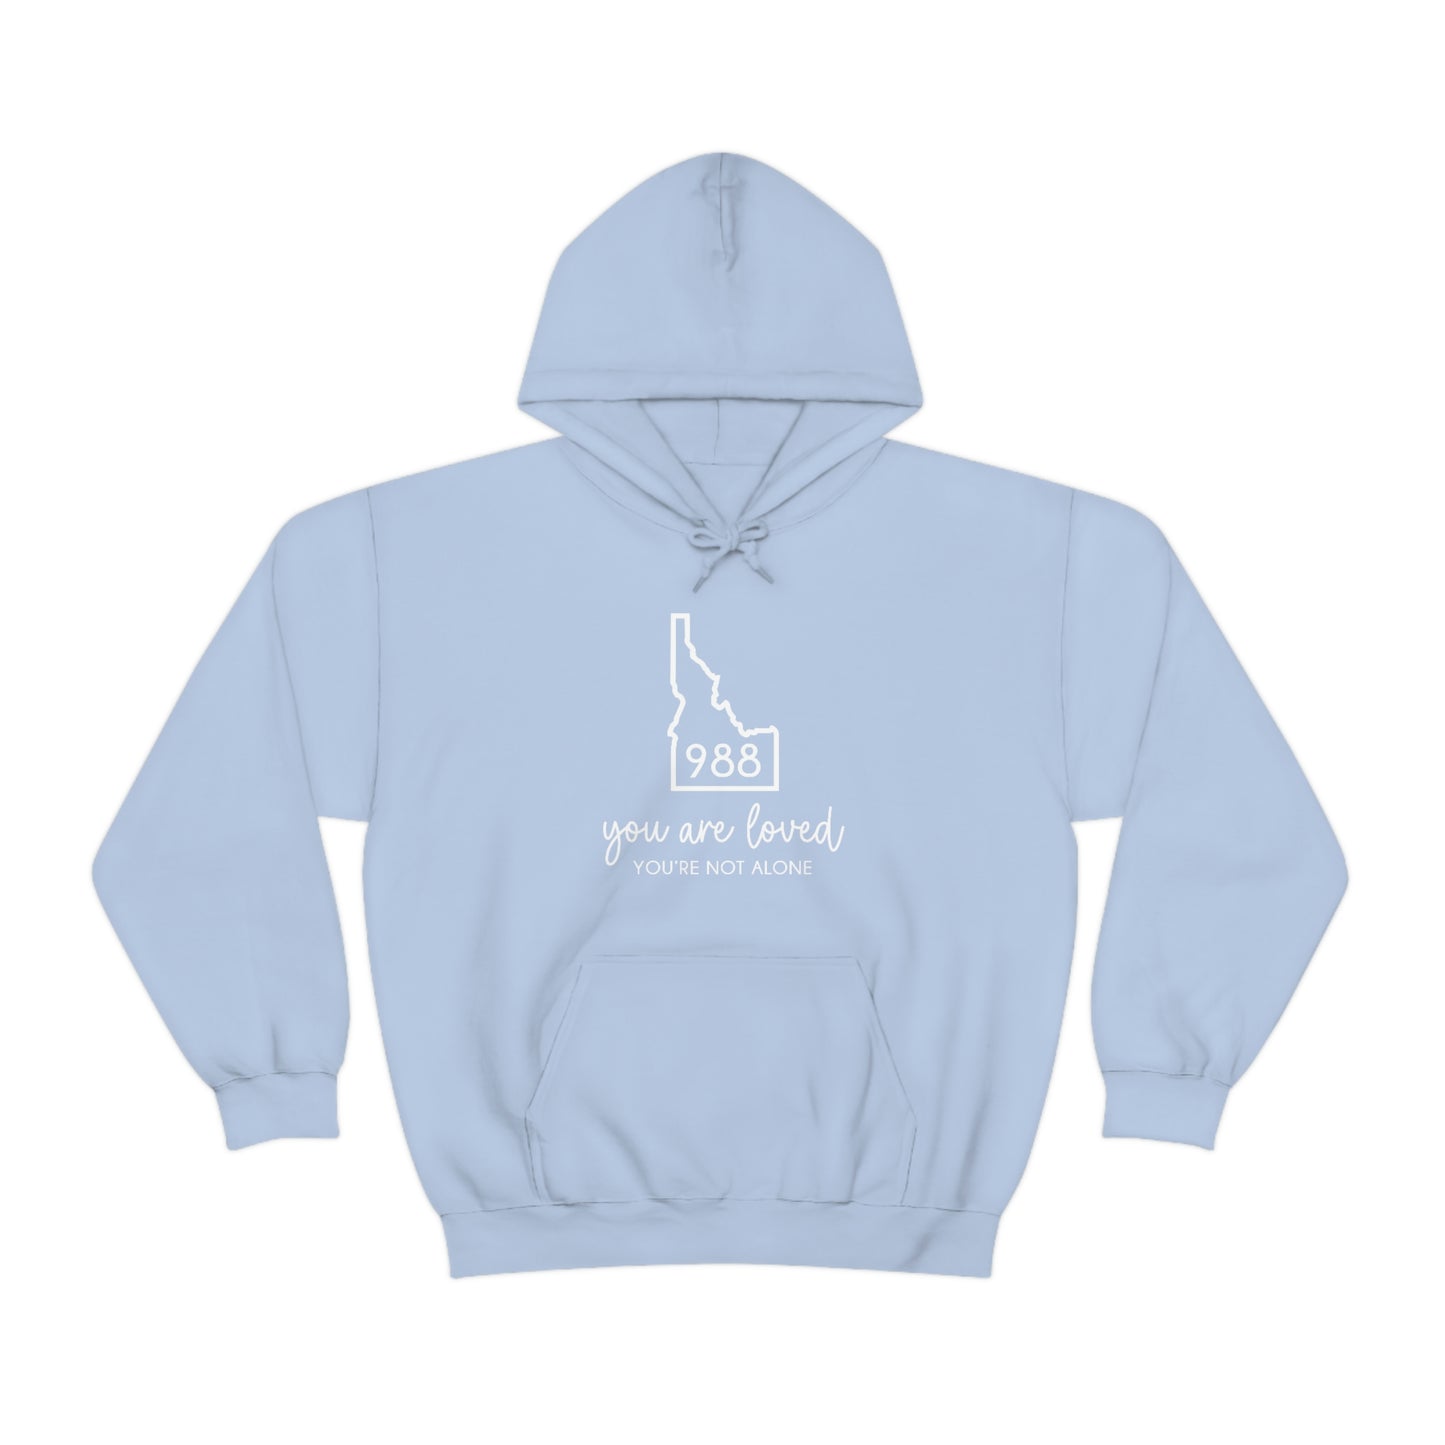 You Are Loved: Suicide Awareness Unisex Hoodie